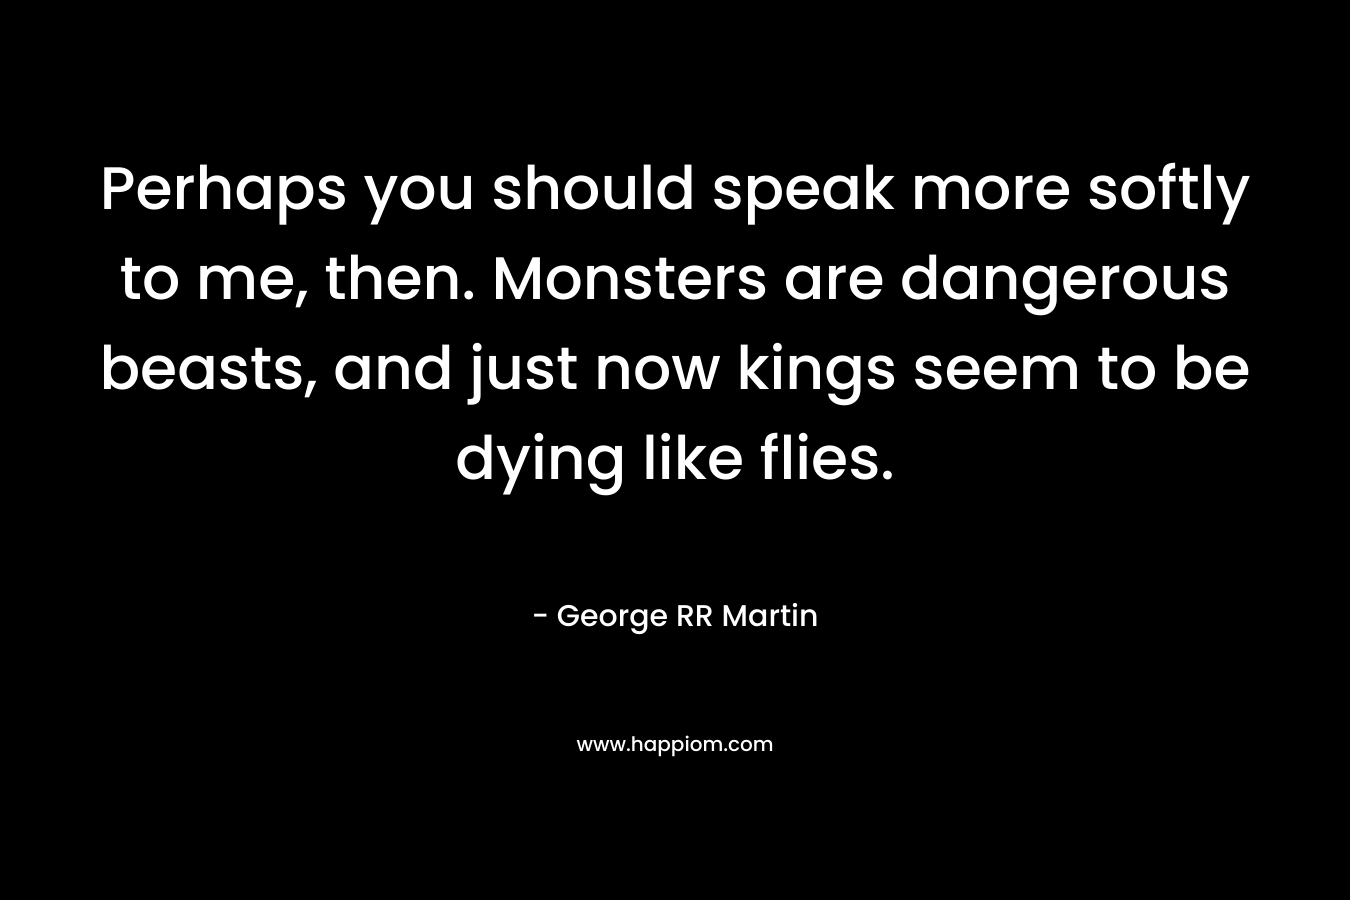 Perhaps you should speak more softly to me, then. Monsters are dangerous beasts, and just now kings seem to be dying like flies. – George RR Martin